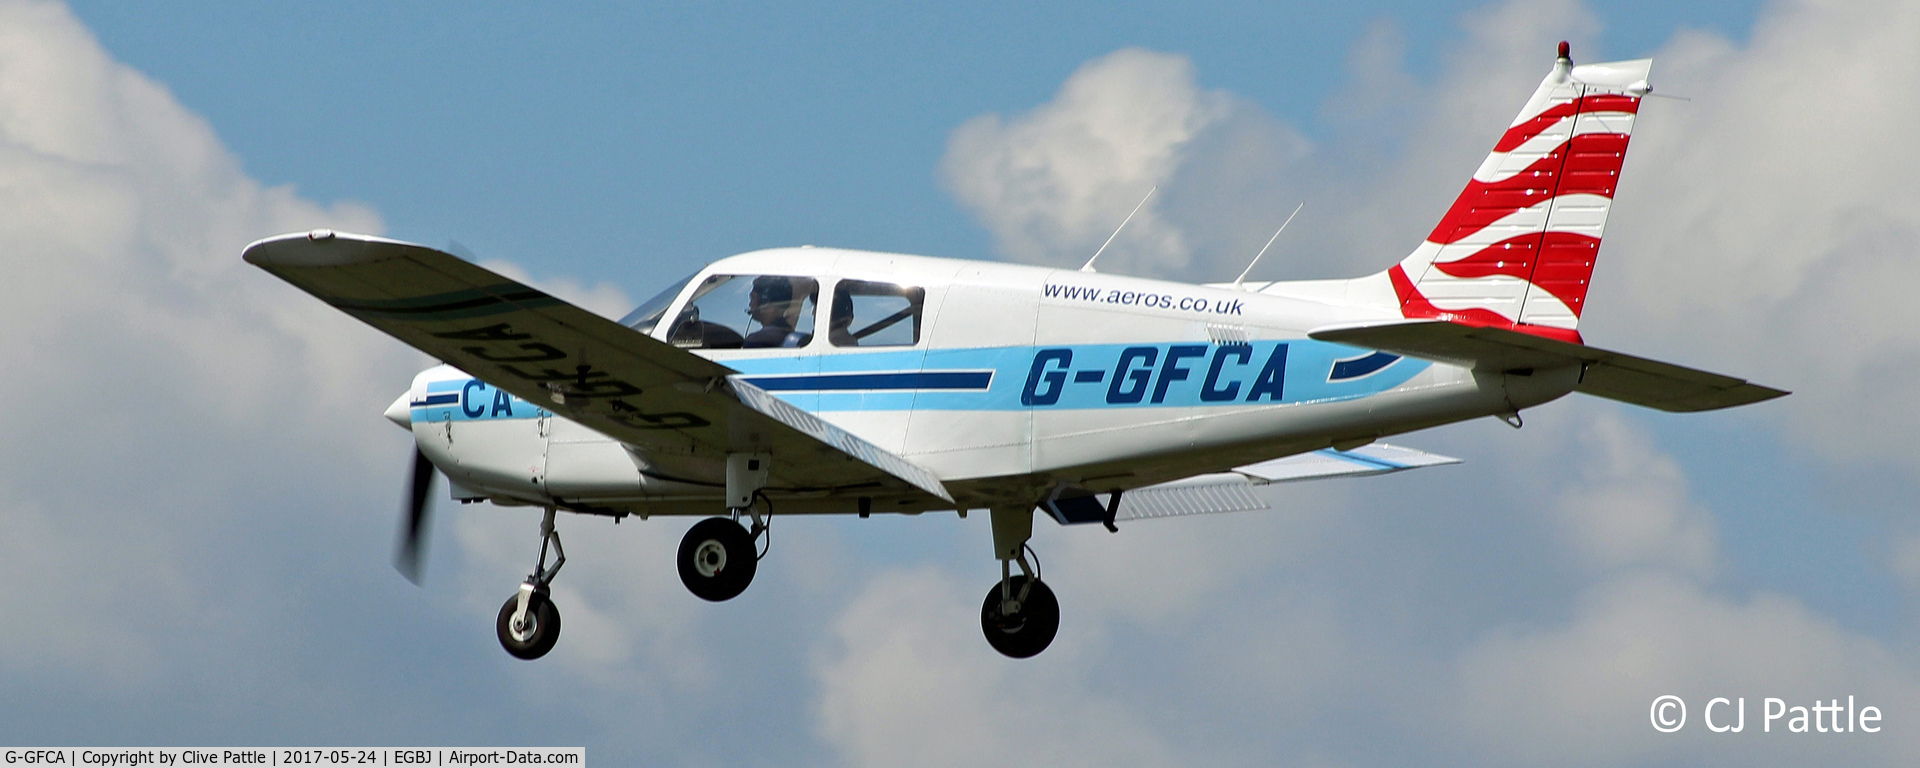 G-GFCA, 1989 Piper PA-28-161 Cadet C/N 28-41100, On finals to Staverton EGBJ